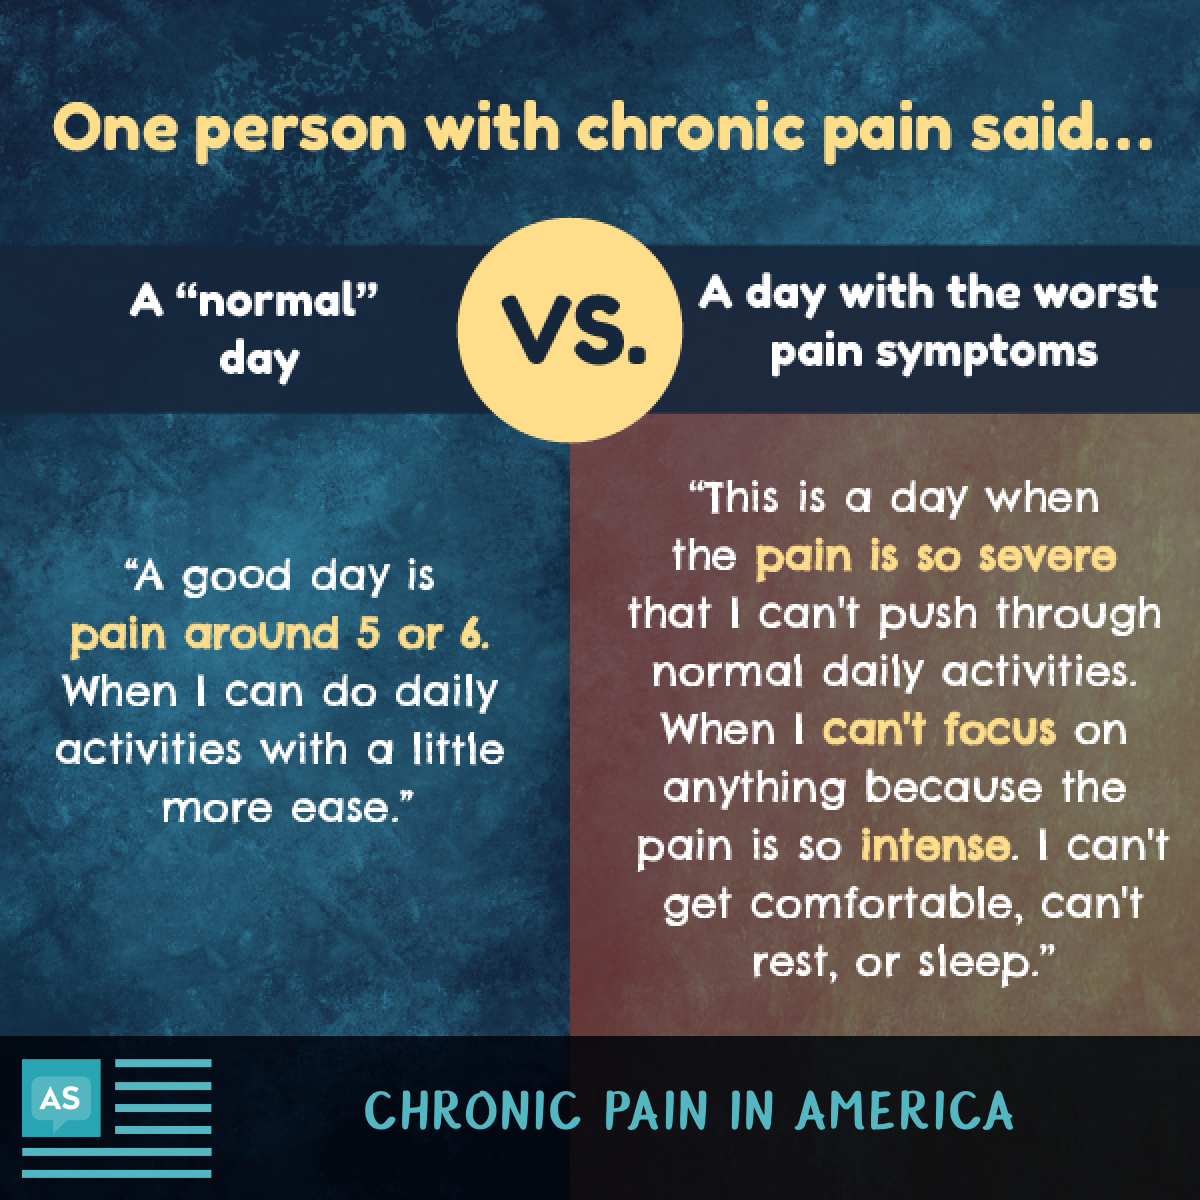 Quotes from one respondent comparing a normal day with pain versus a day with the worst, severe pain symptoms.